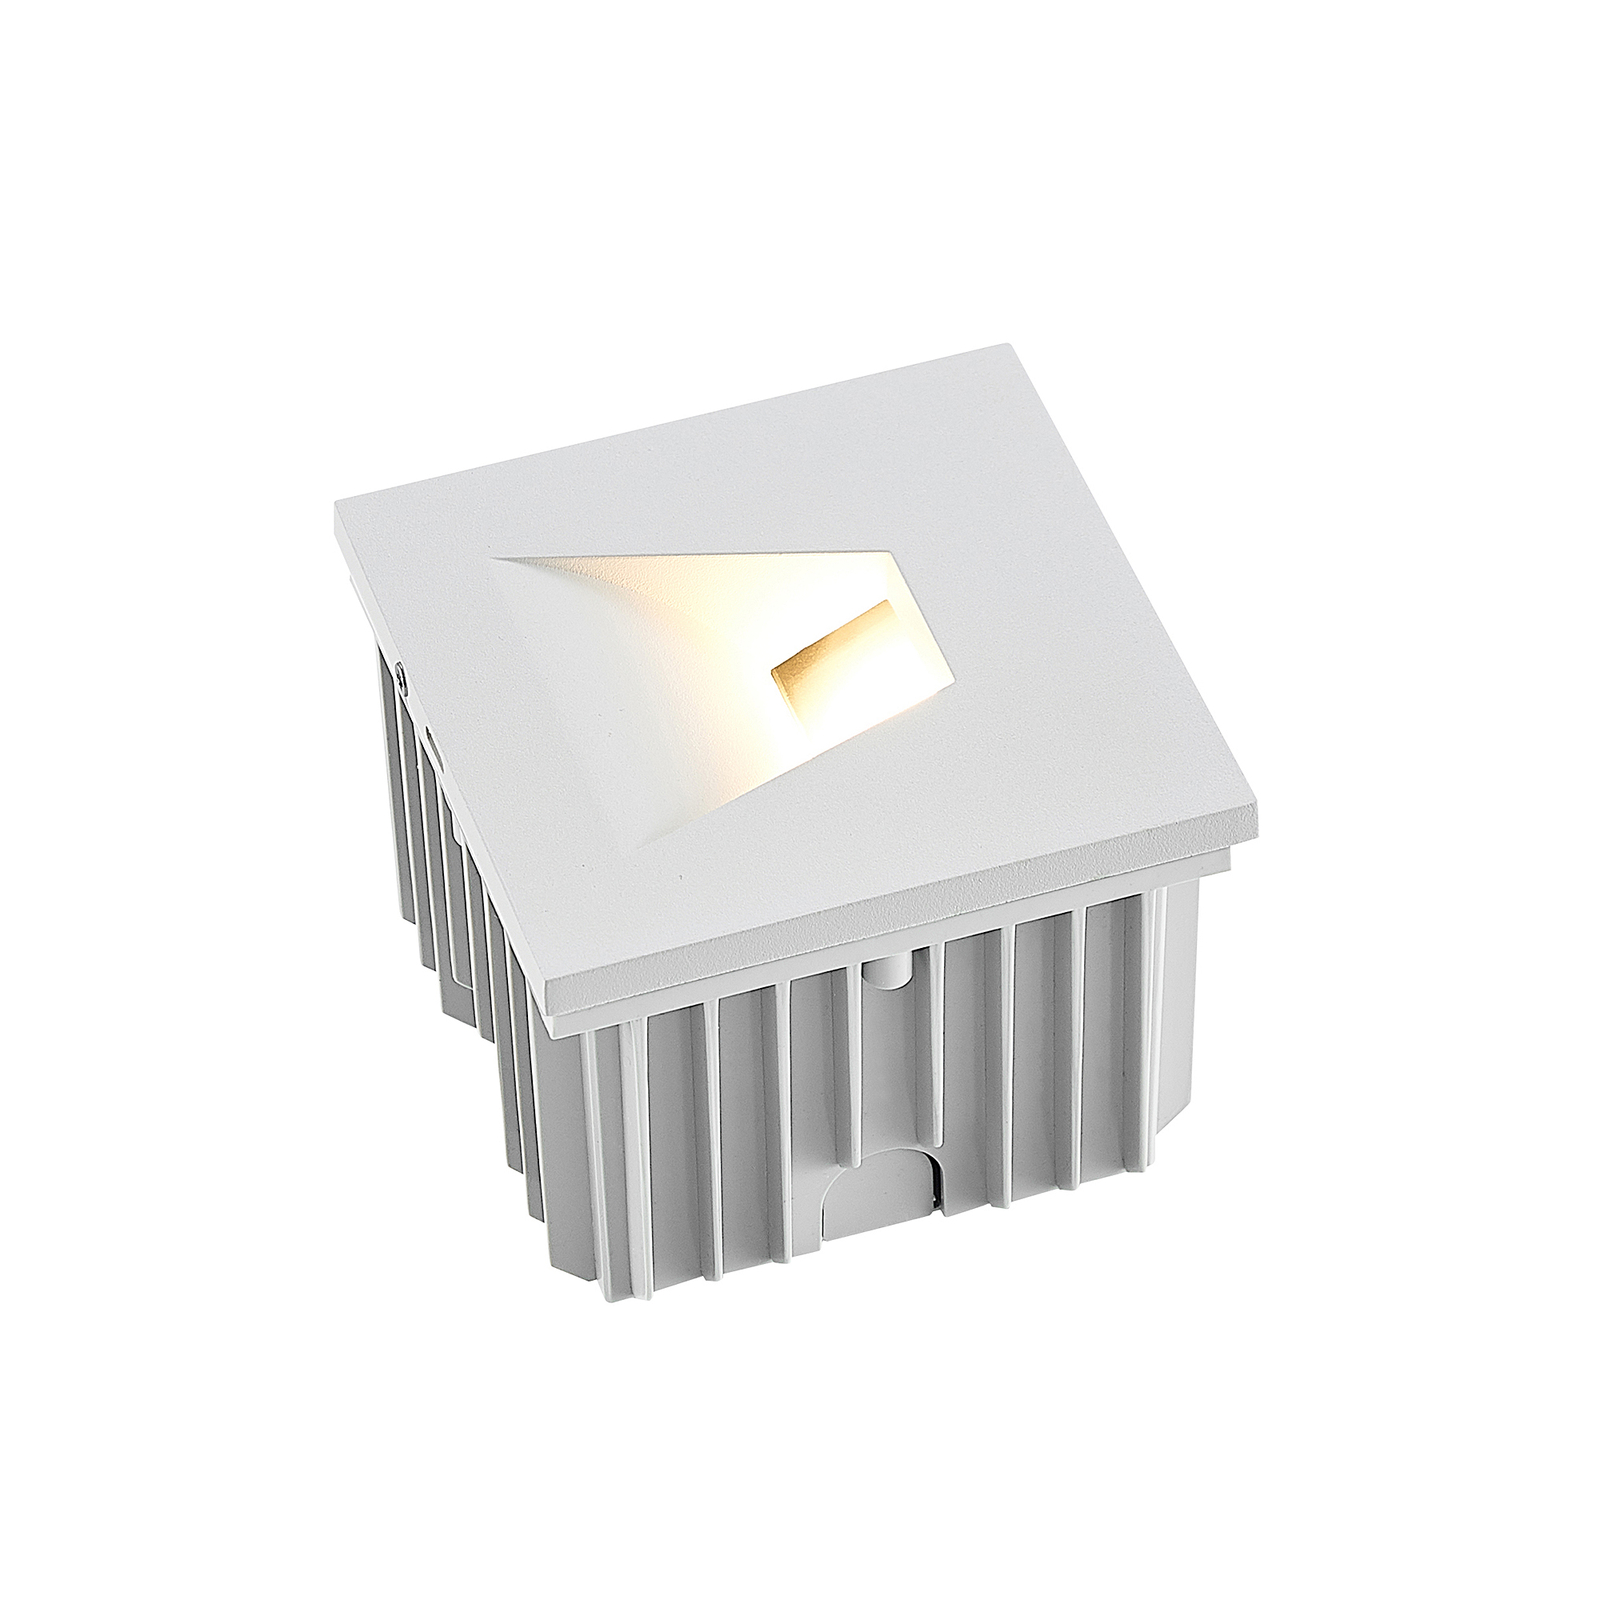 Arcchio Lasca recessed wall light, white, G9, IP65